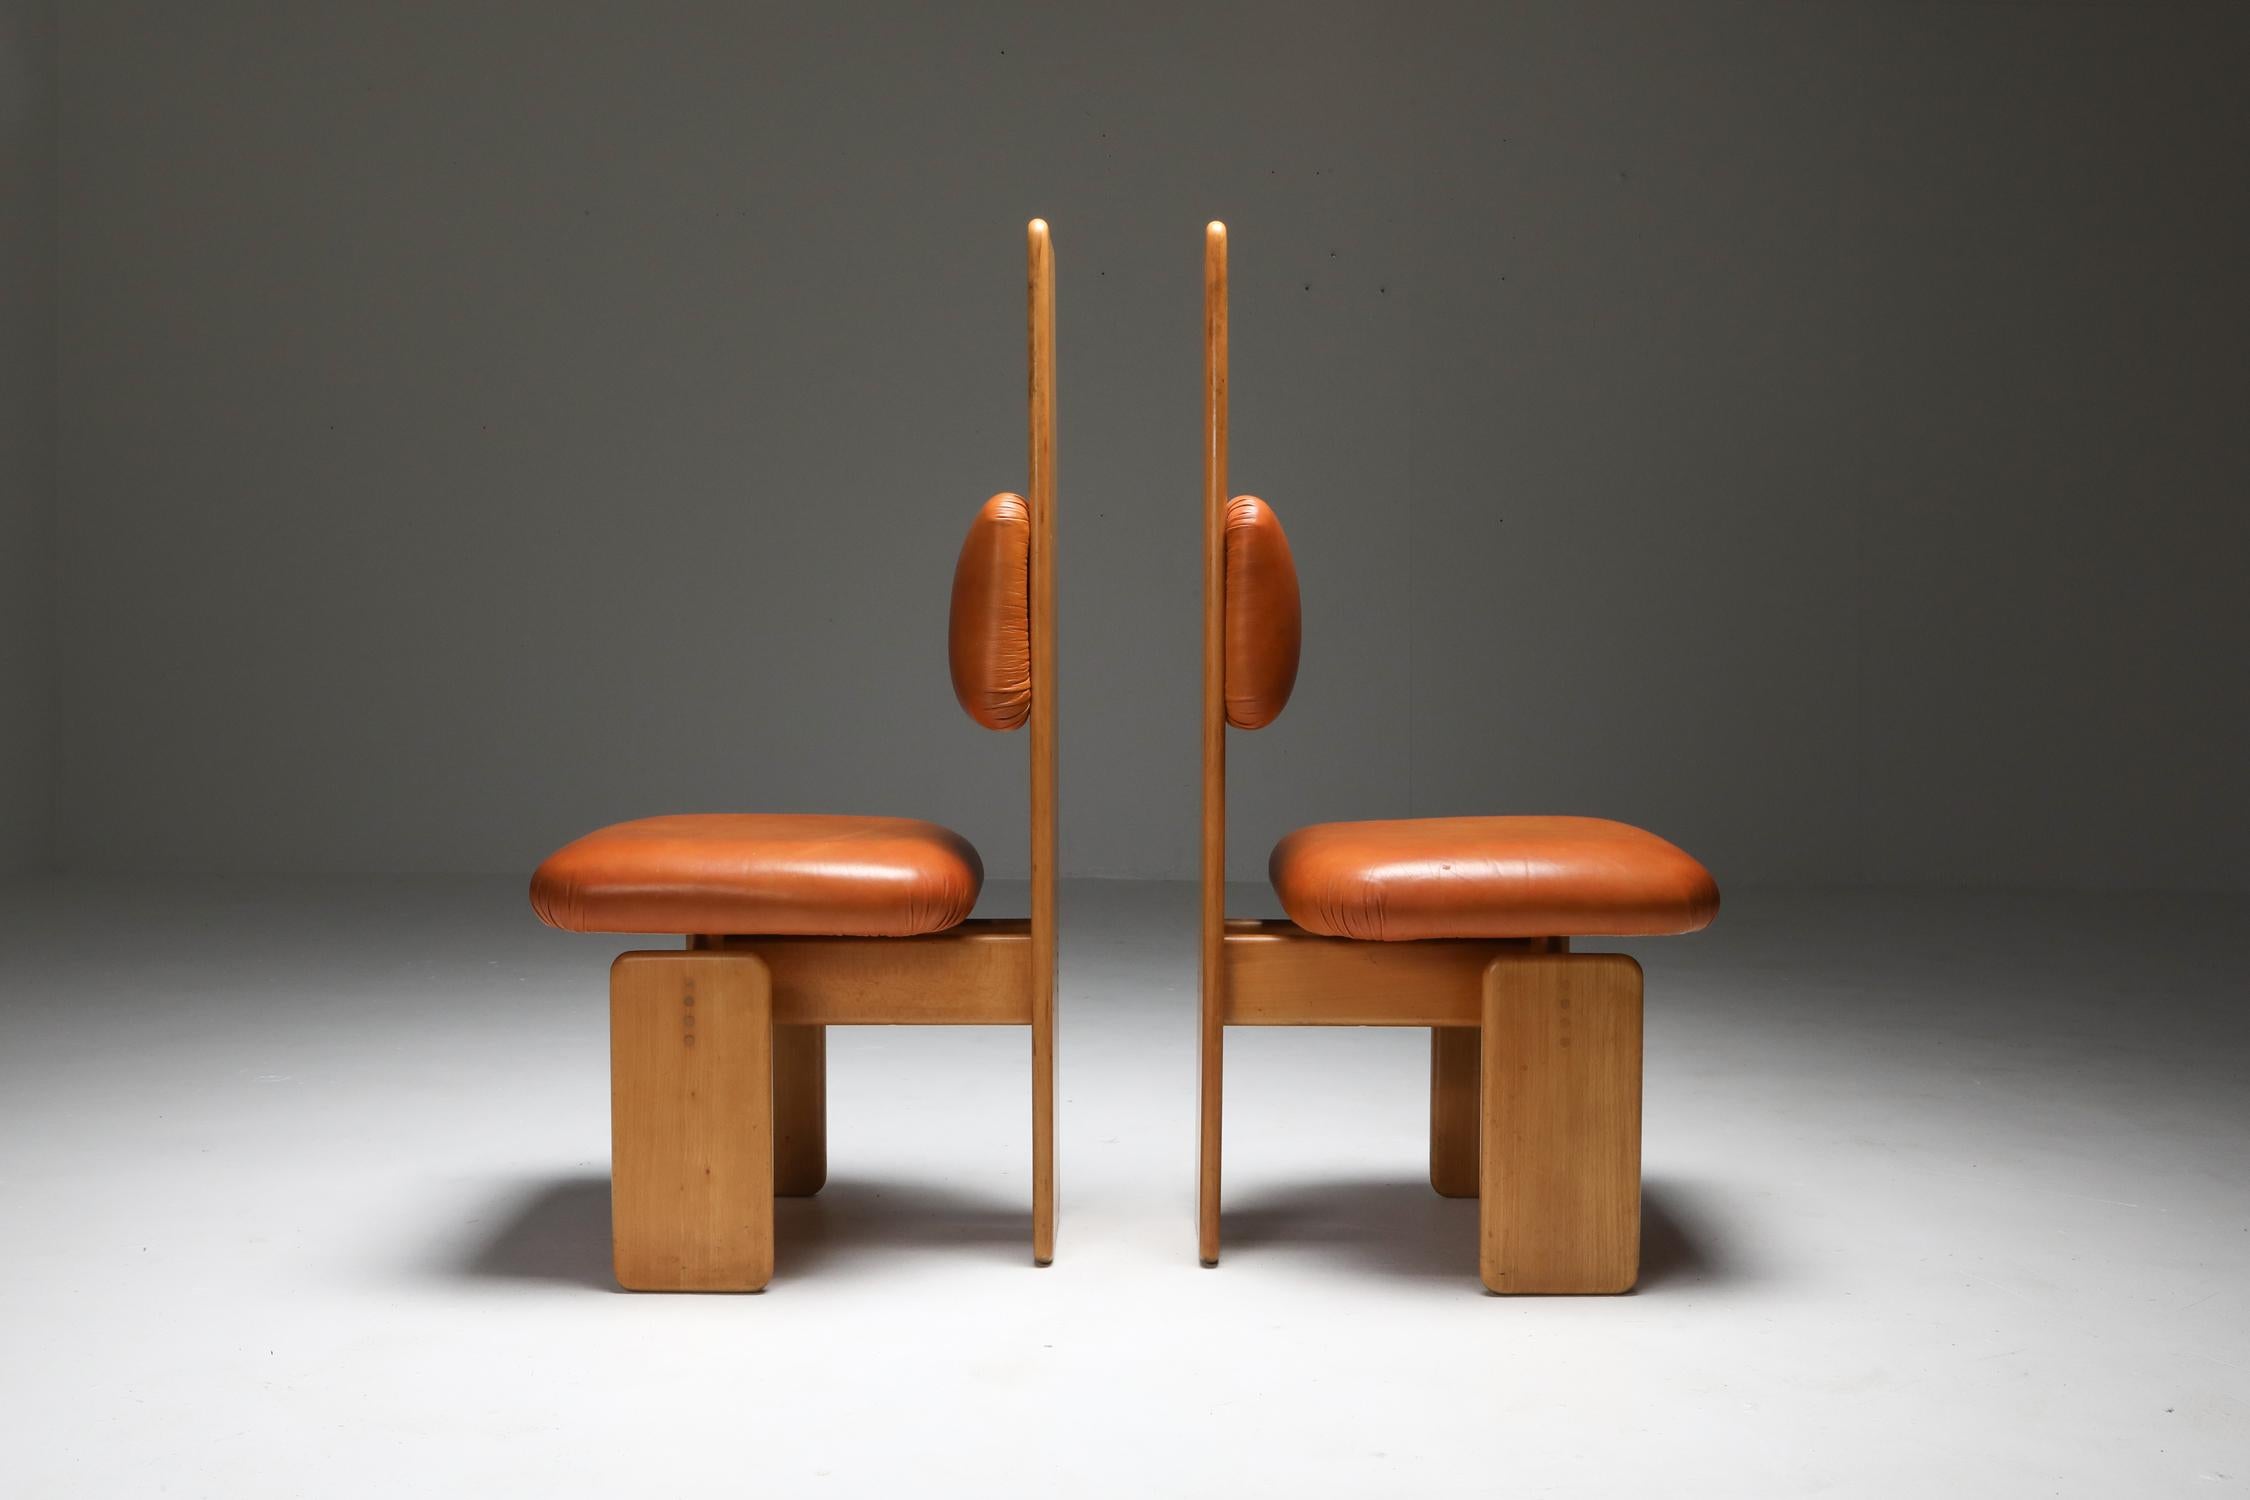 Mario Marenco dining chairs, set of six, Postmodern, beech, tan leather, Italy 1970s

Impressive and tall chairs made in solid beech.
The seating has a tan / cognac leather upholstery.
Very sculptural and well designed set in the style of Afra &